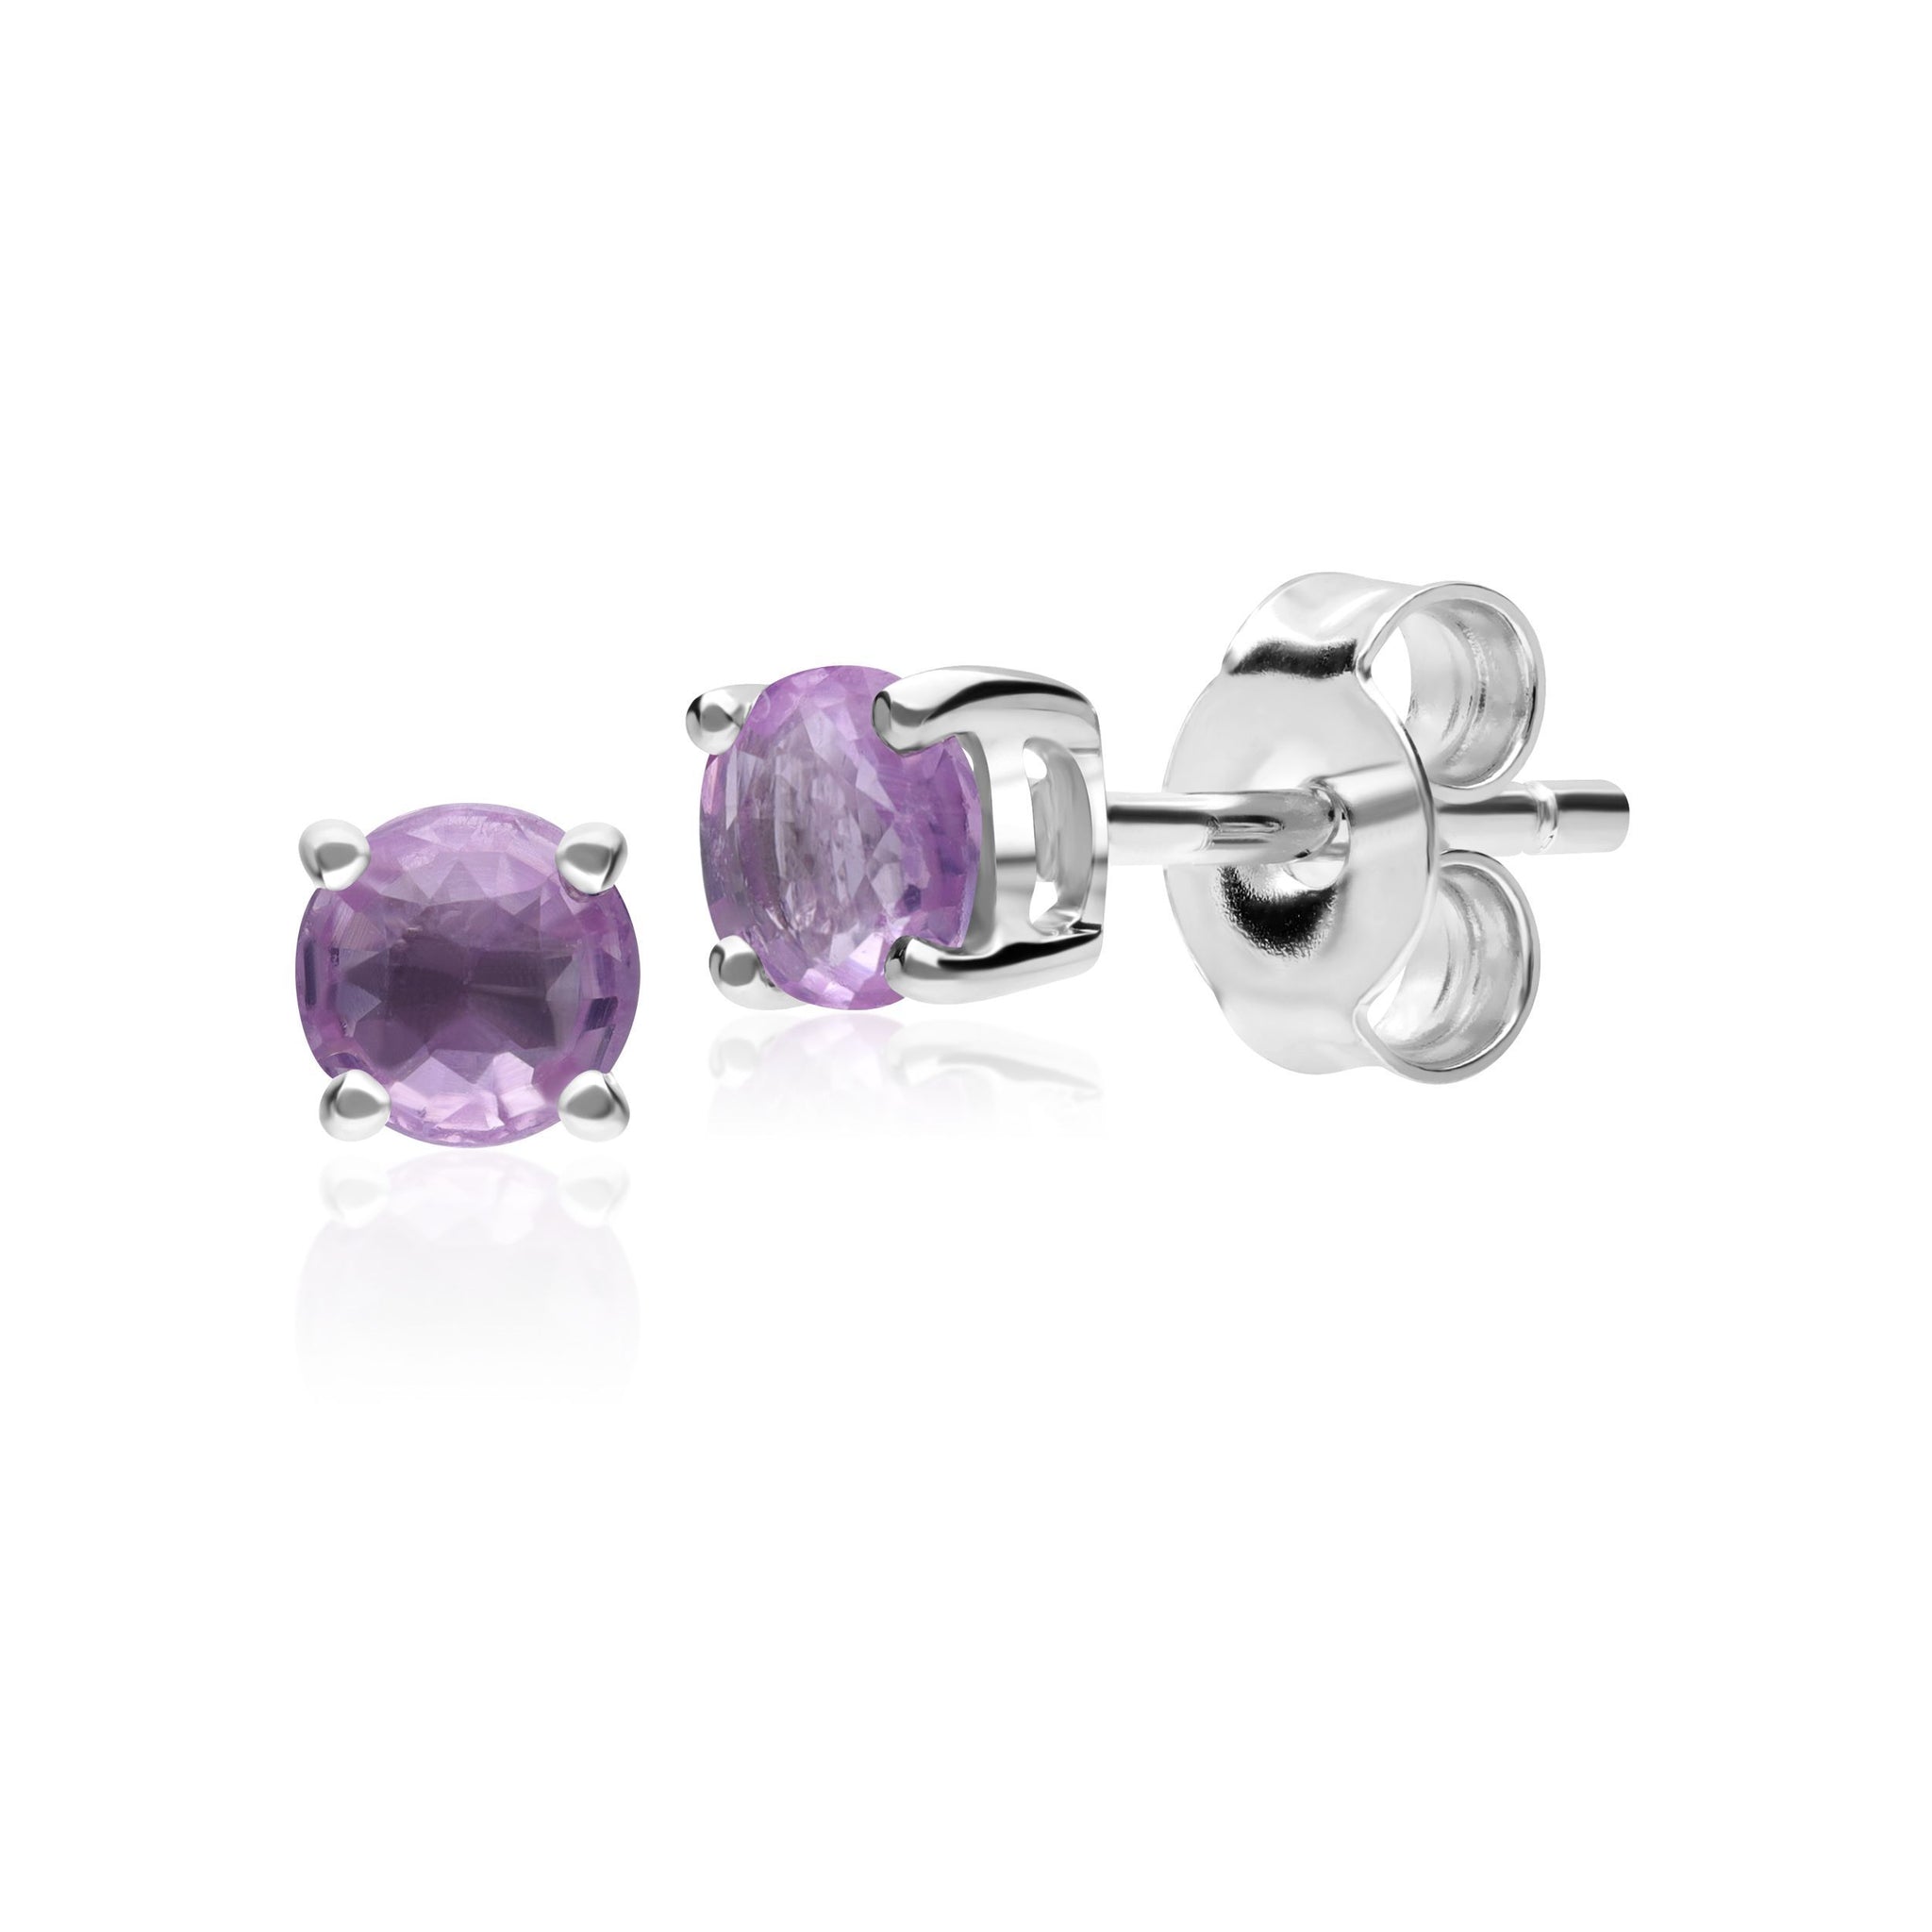 Classic Round Pink Sapphire Stud Earrings in 9ct White Gold